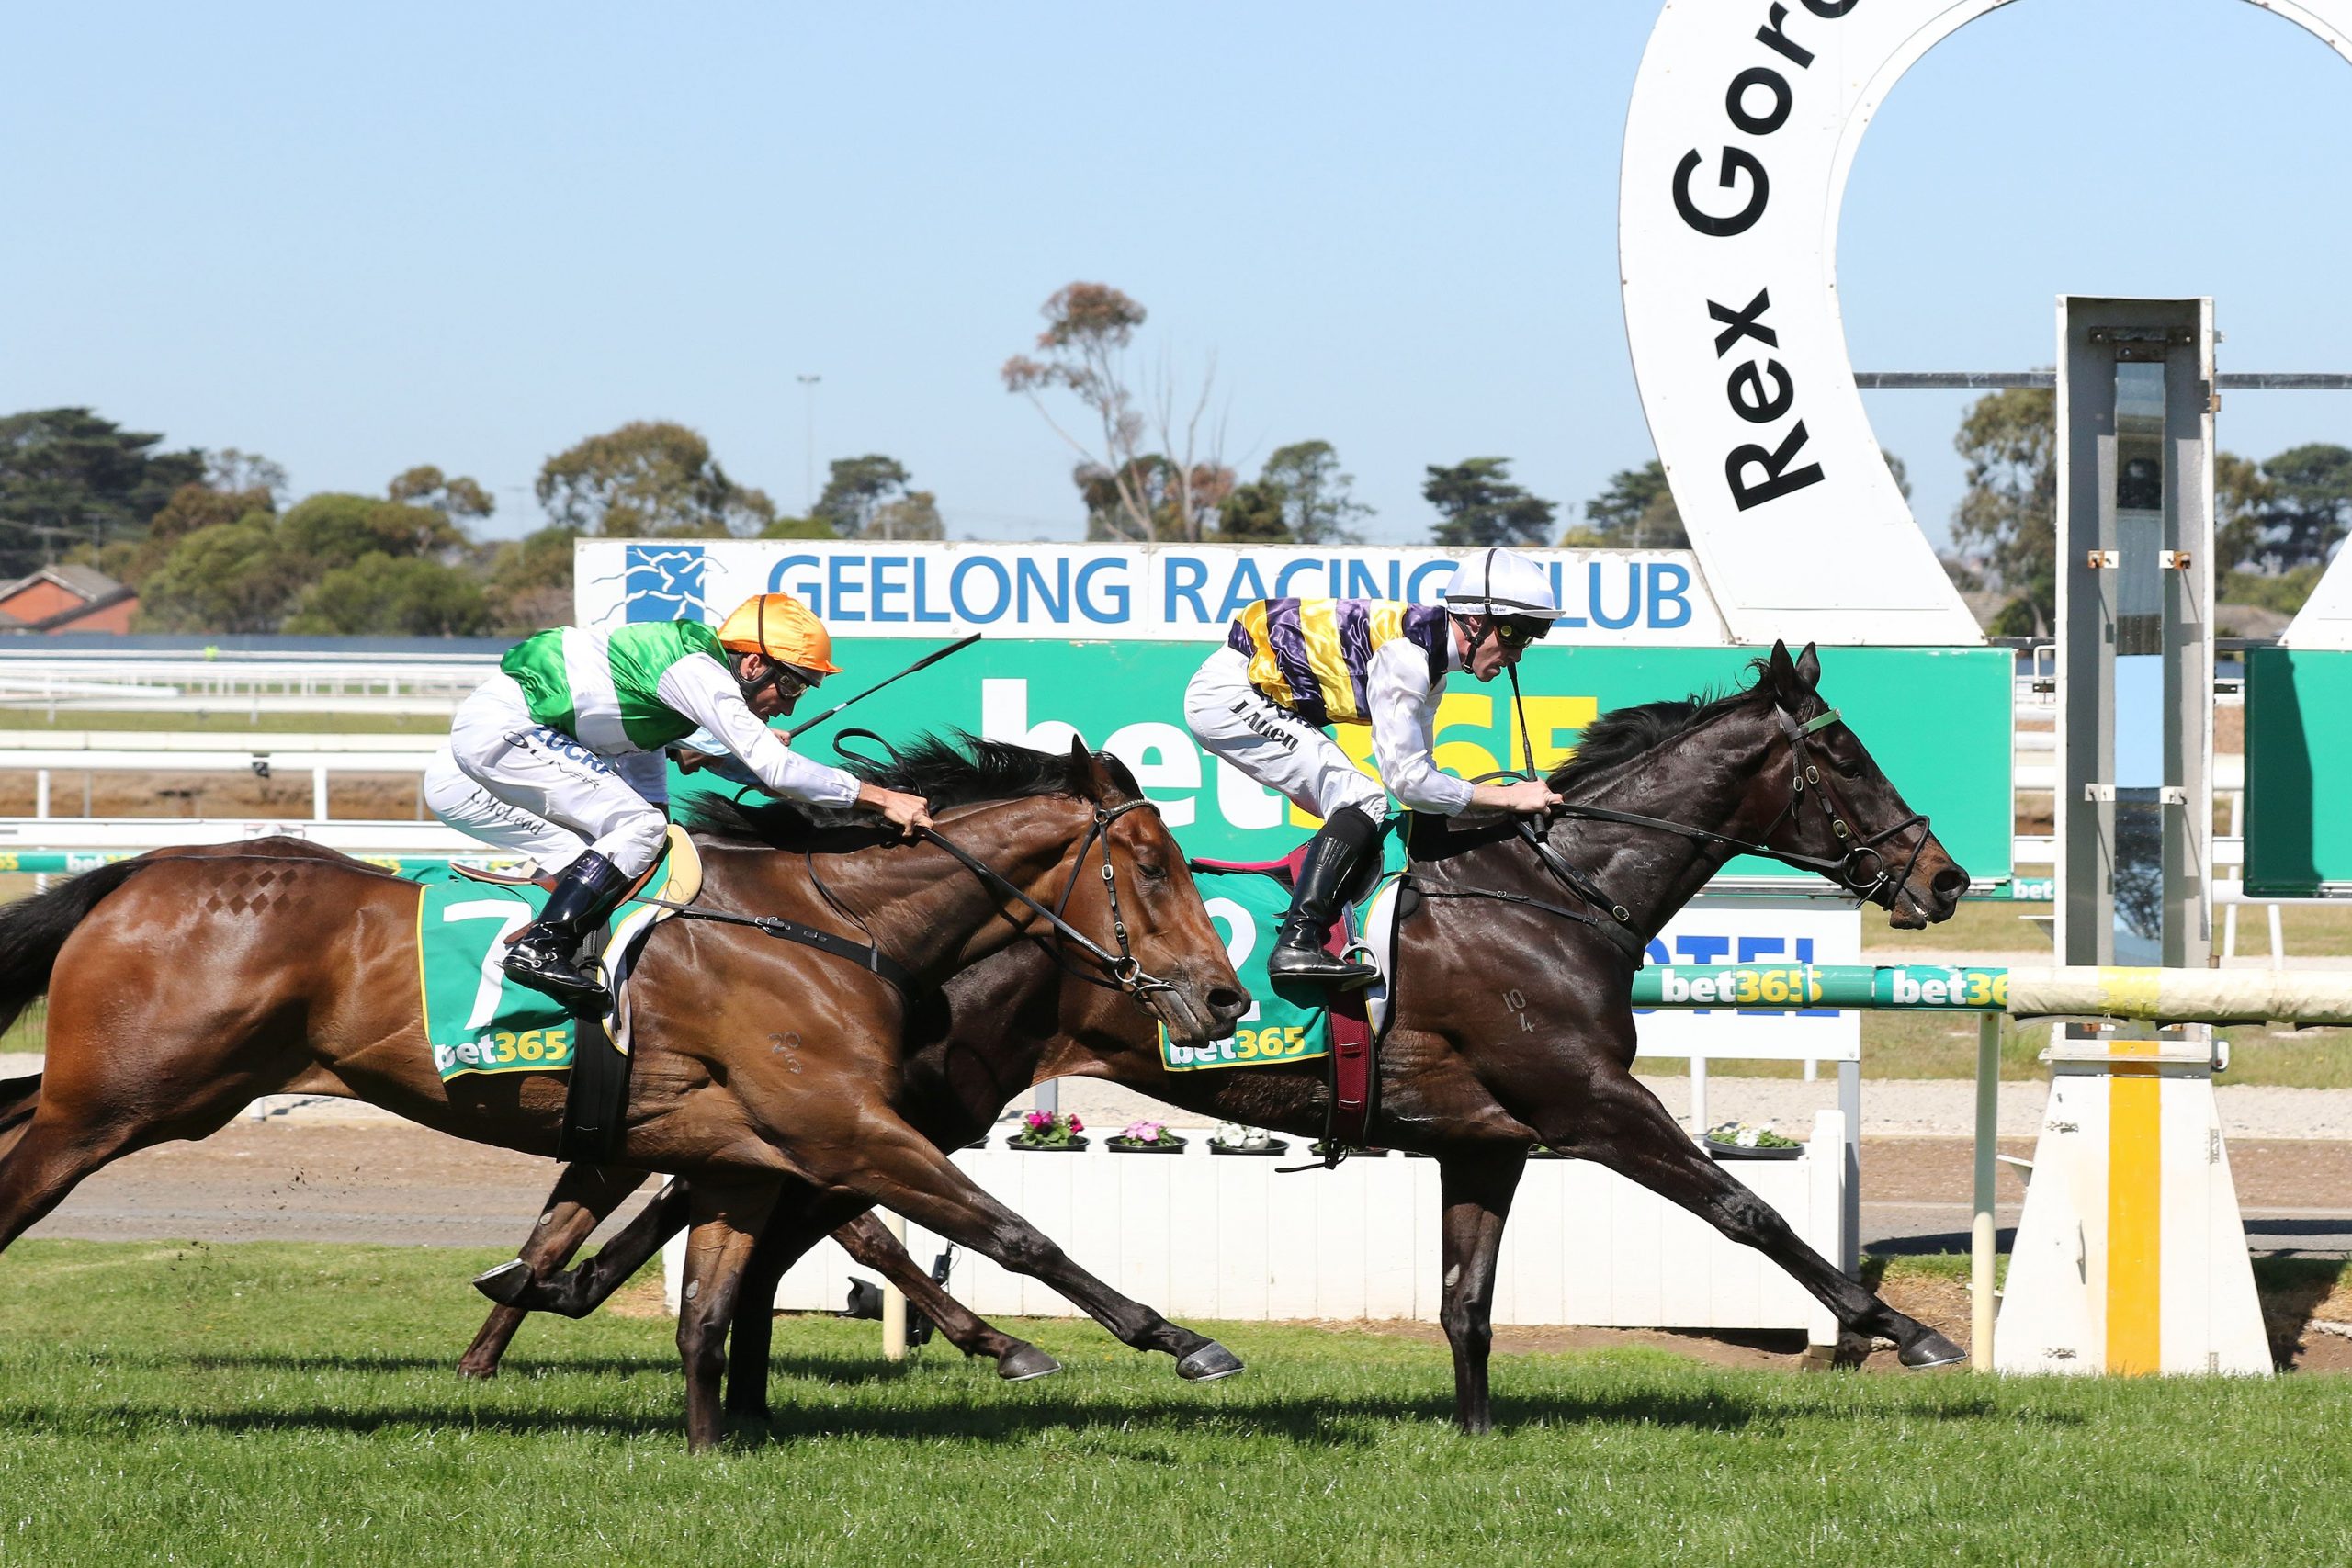 Horse Racing Tips & Best Bets for Geelong, Geelong Cup day – Wednesday